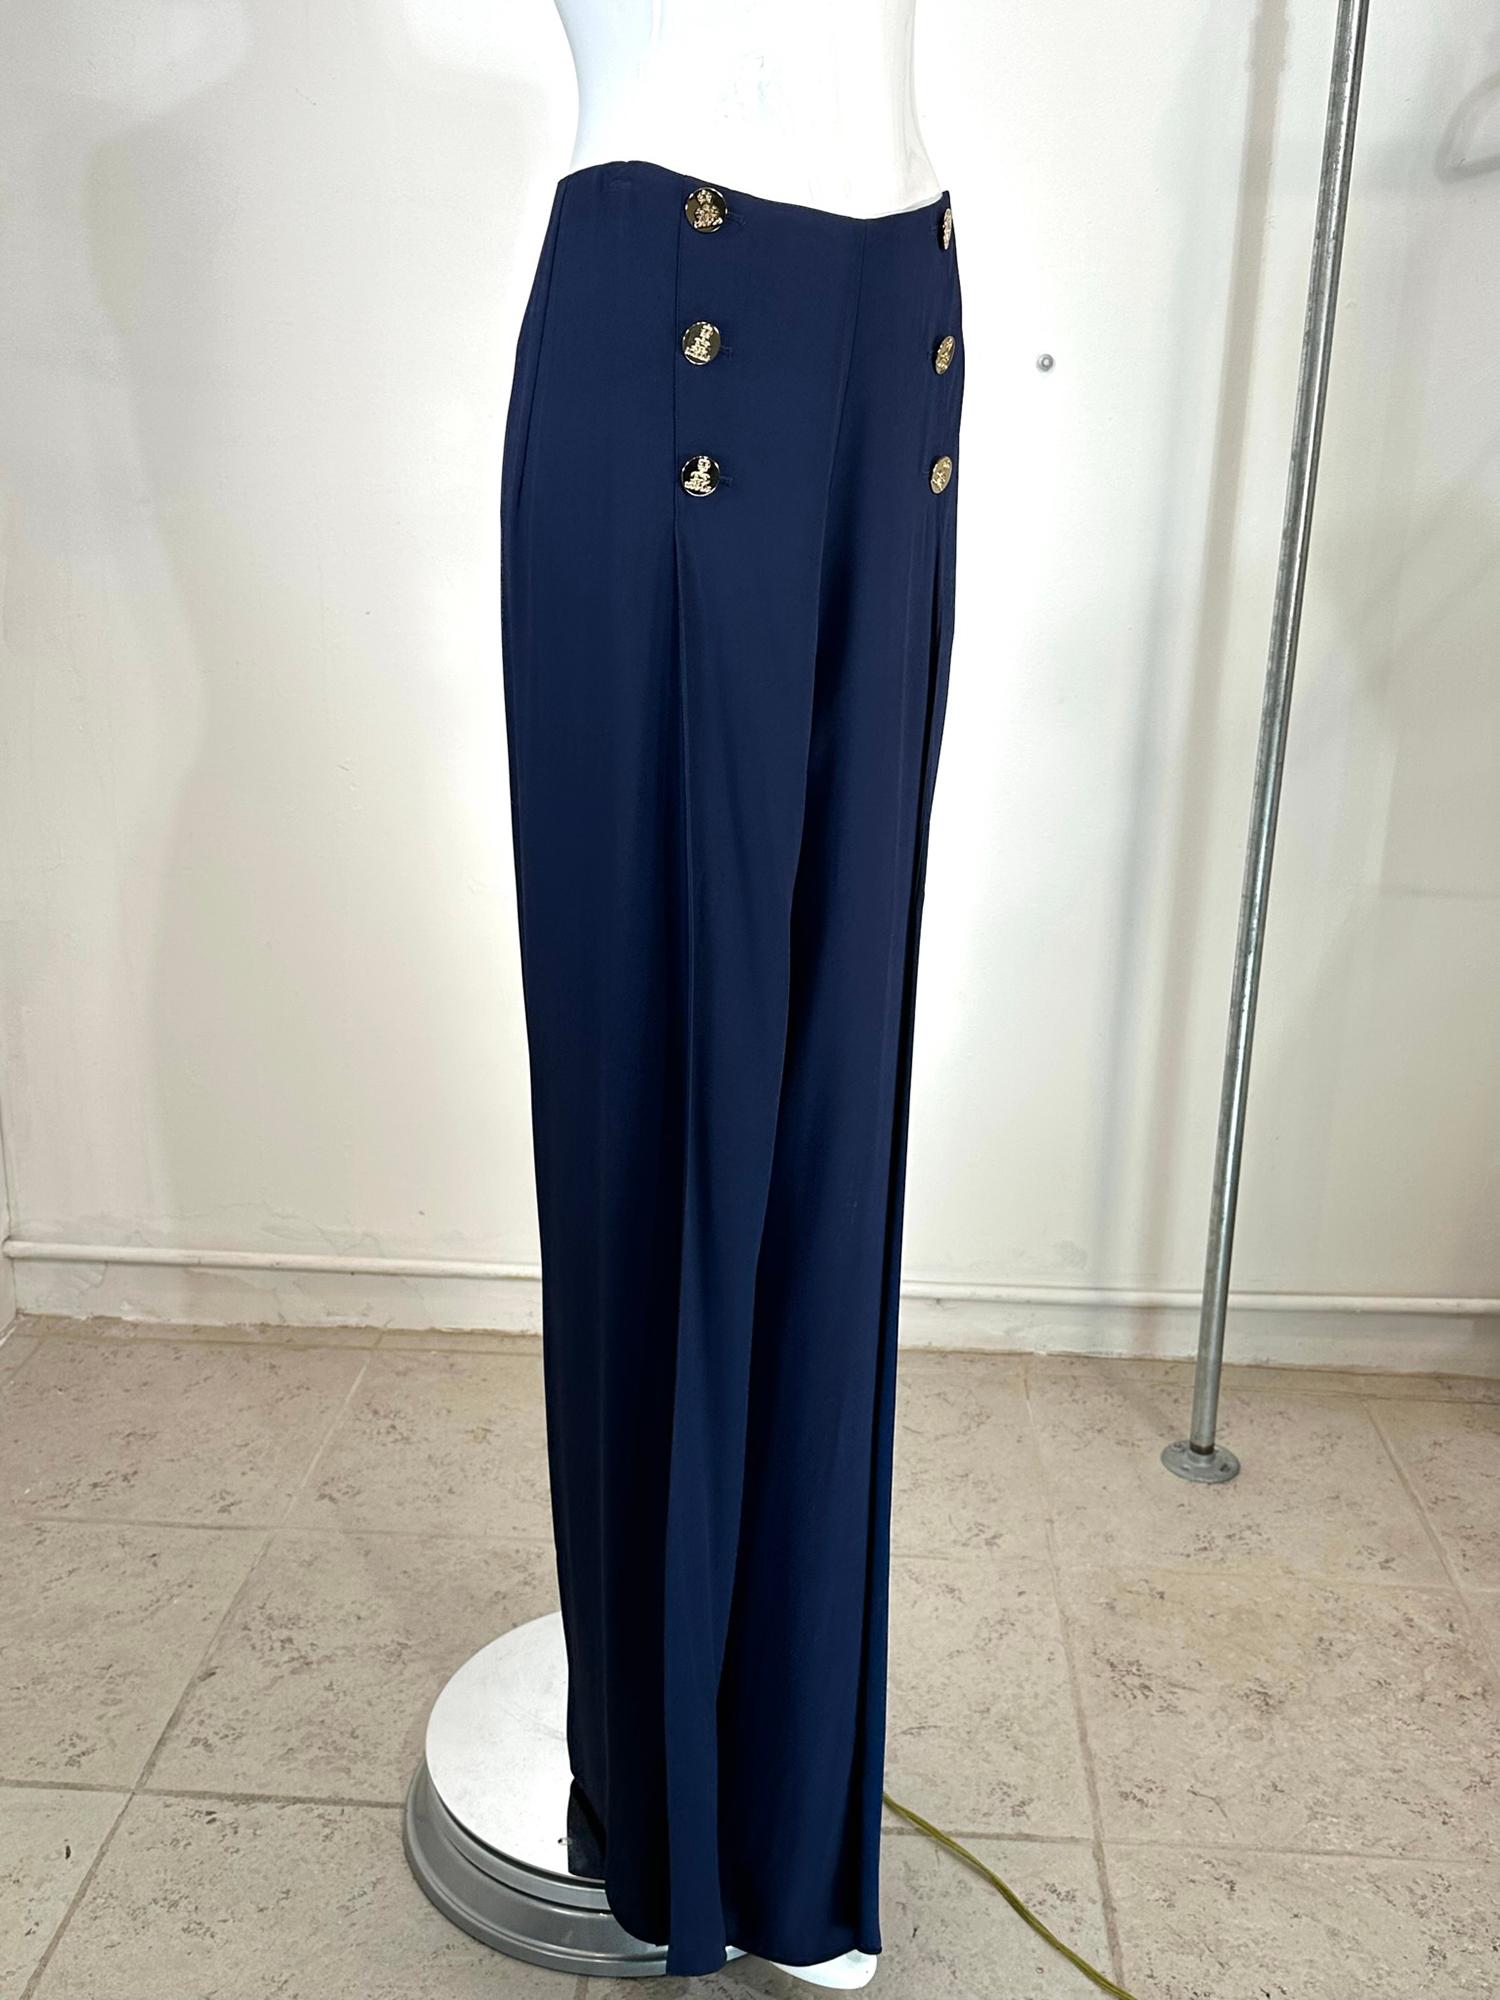 Ralph Lauren Purple Label pre fall 2018 pant. Navy blue fluid wide leg pant, the legs are each wrapped & open above the knee, when you walk you can show some leg. The pant sits at about the hip bone top and is seamed with a ribbon band at the